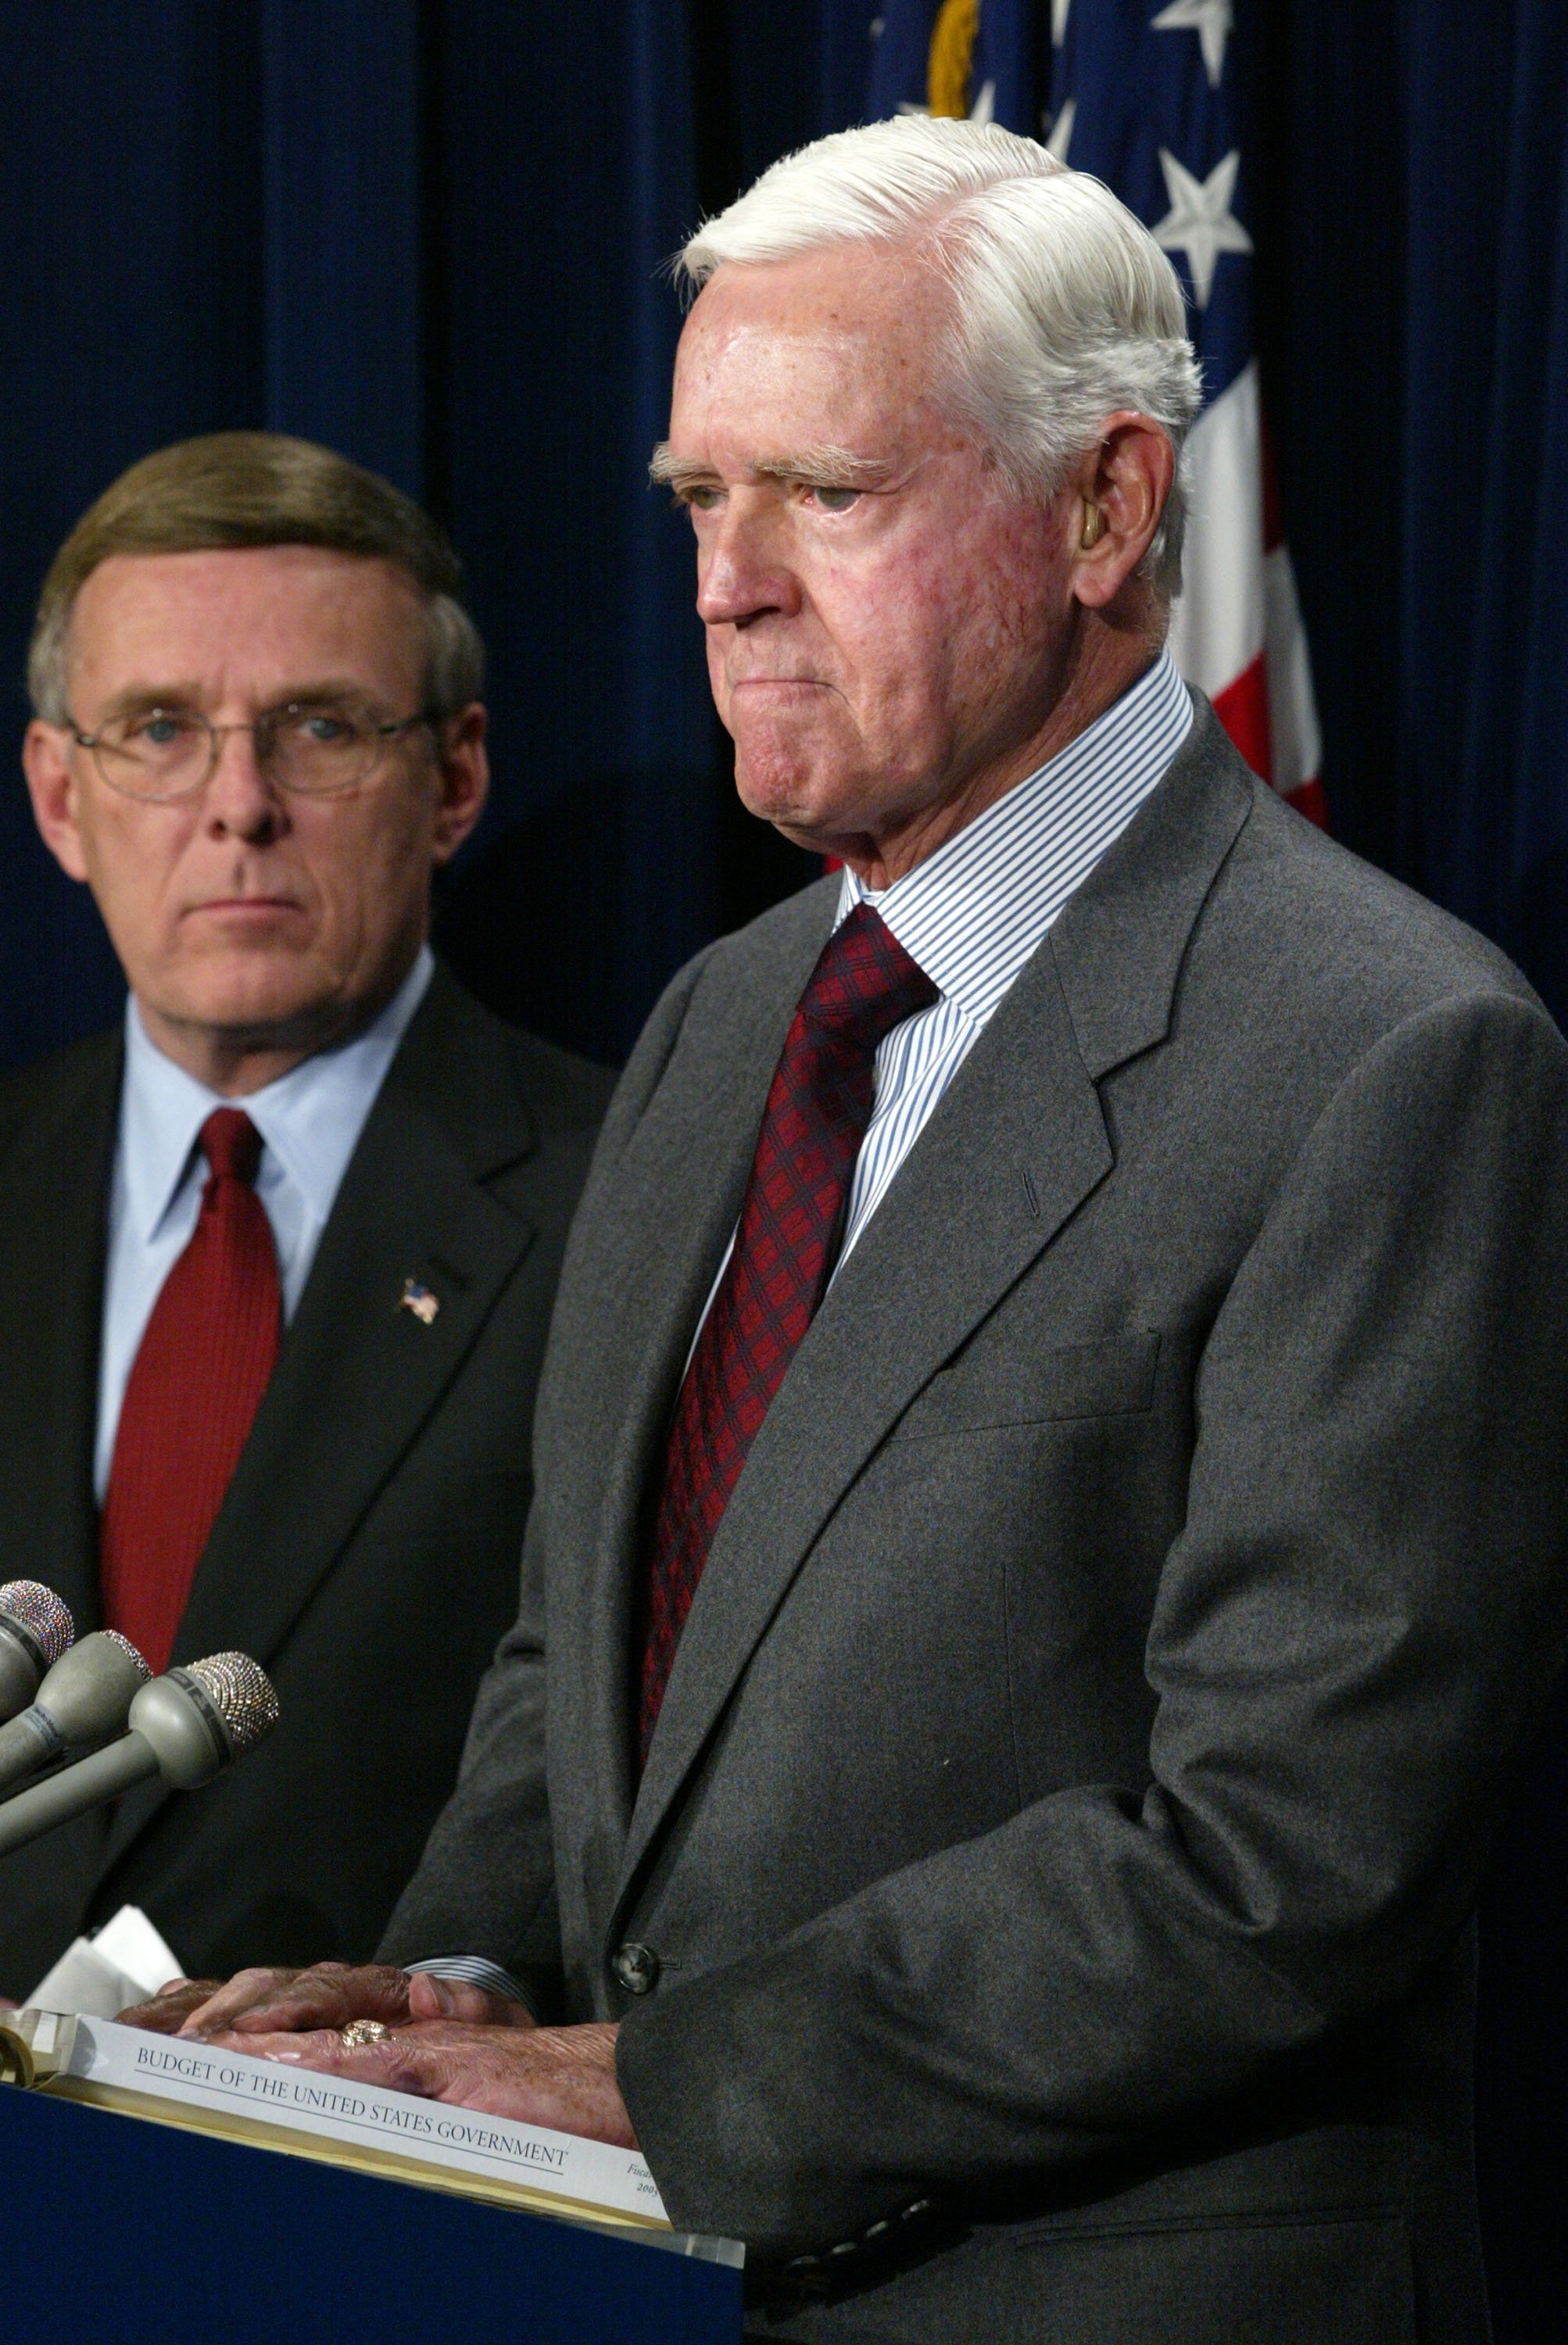 Senator Ernest Hollings standing next to Senator Byron Dorgan during a press conference on Capitol Hill | Photo: Getty Images